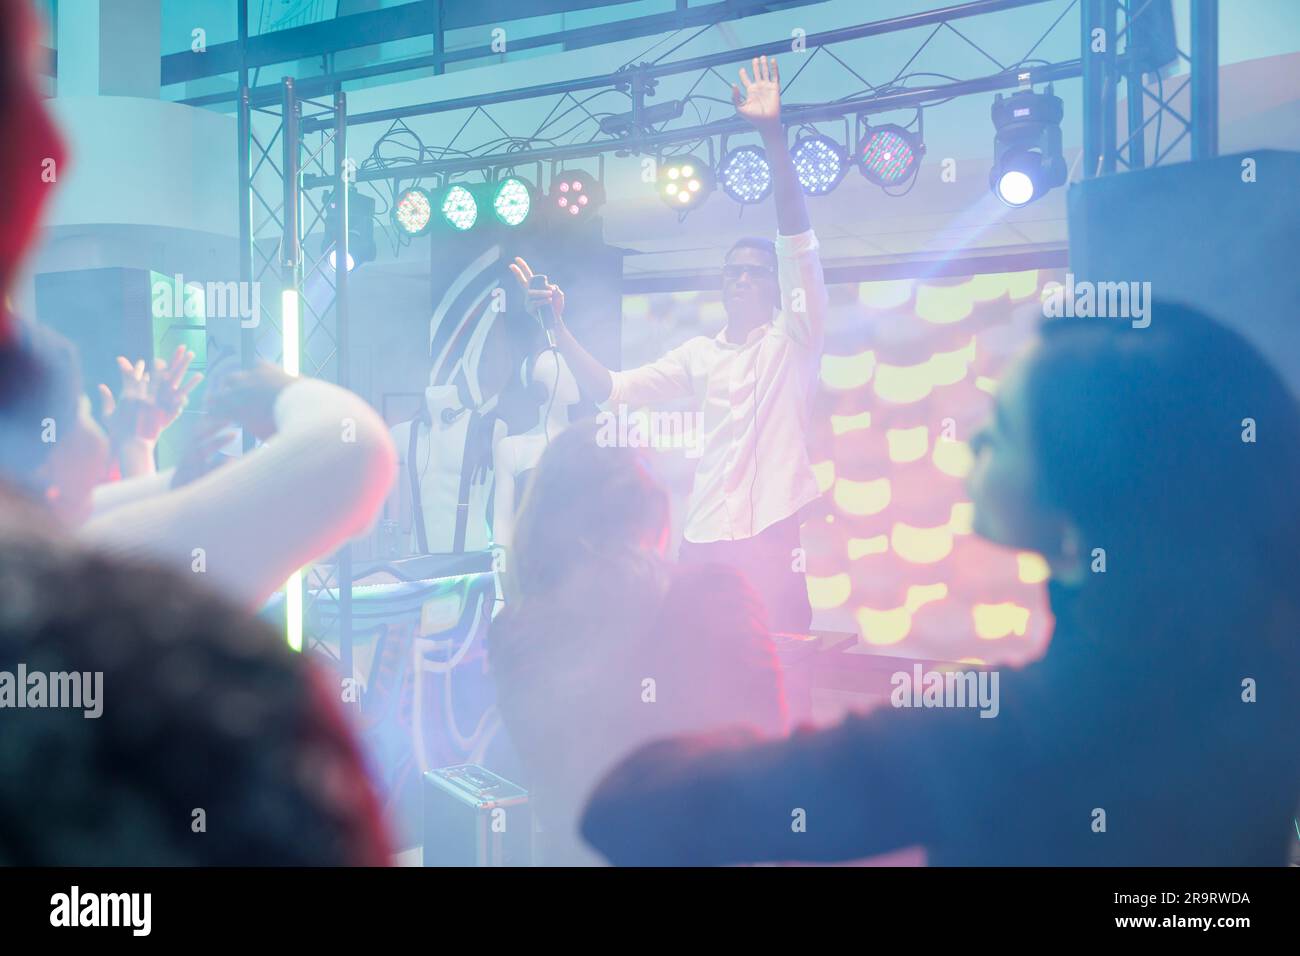 Musician with microphone raising hand while entertaining crowd from stage in nightclub. Dj singing and playing at electronic music show and discotheque party in club with spotlights Stock Photo